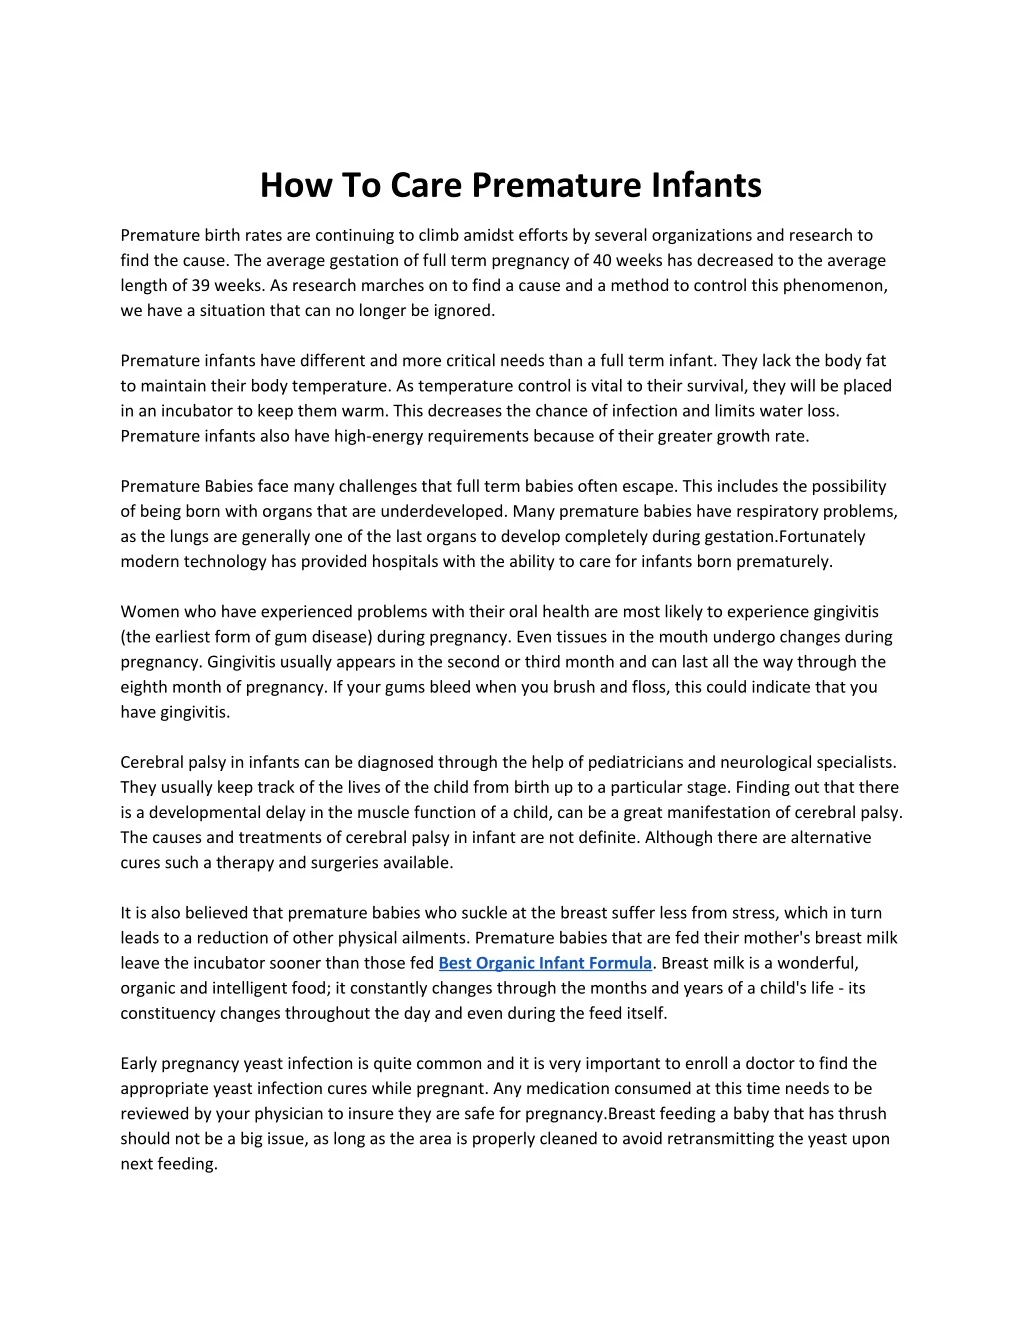 how to care premature infants